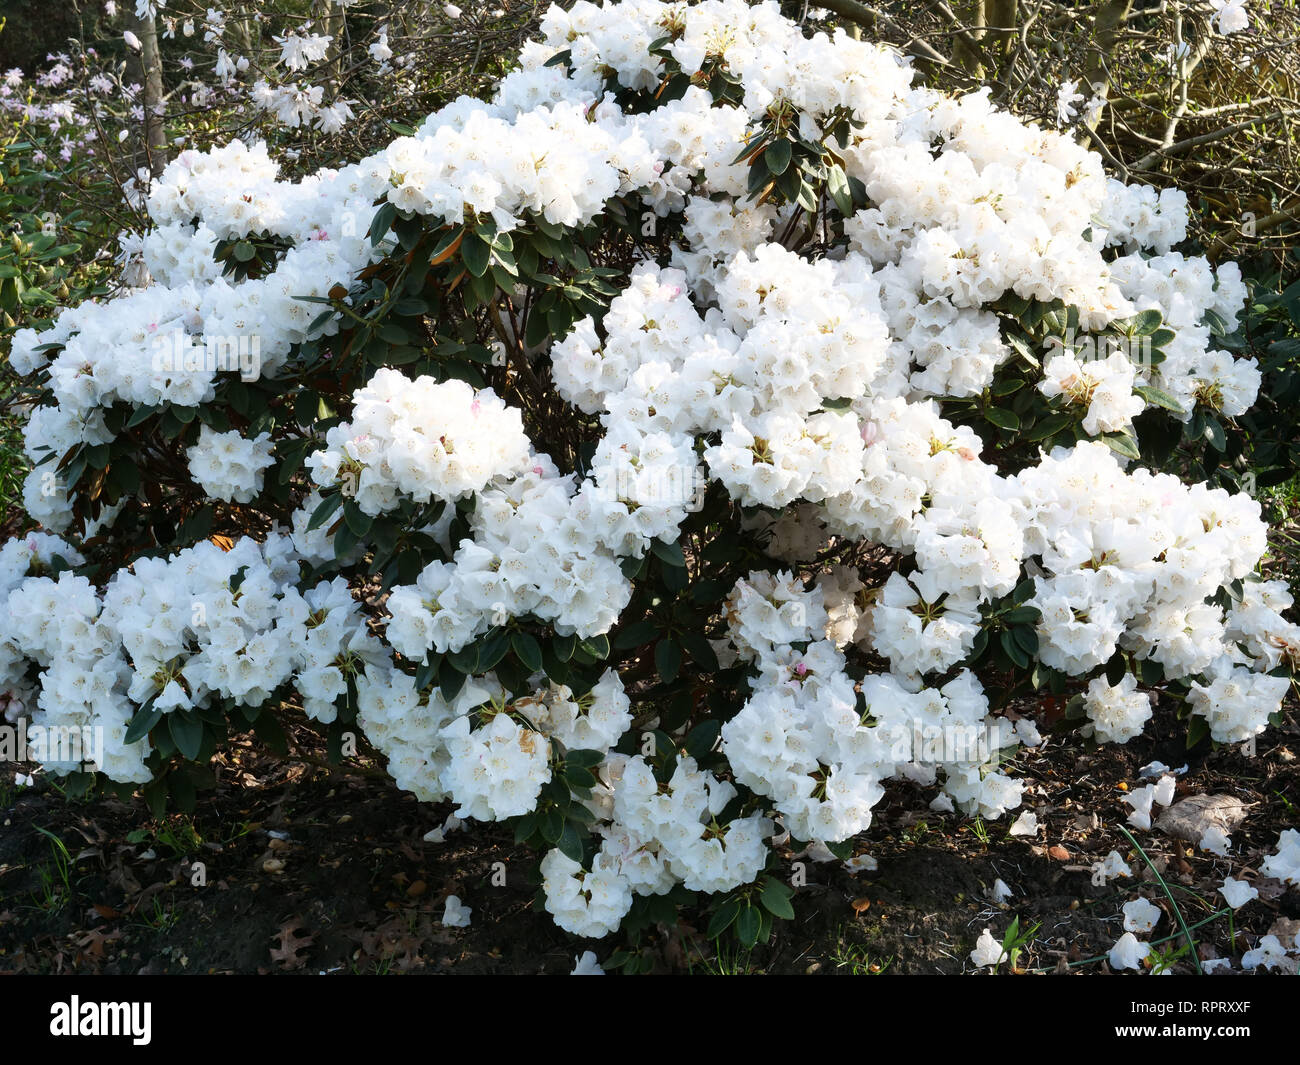 Rhododendron pachysanthum is a medium size  garden shrub, with white and pale pink flowers in March and April, a good plant with handsome foliage. Stock Photo